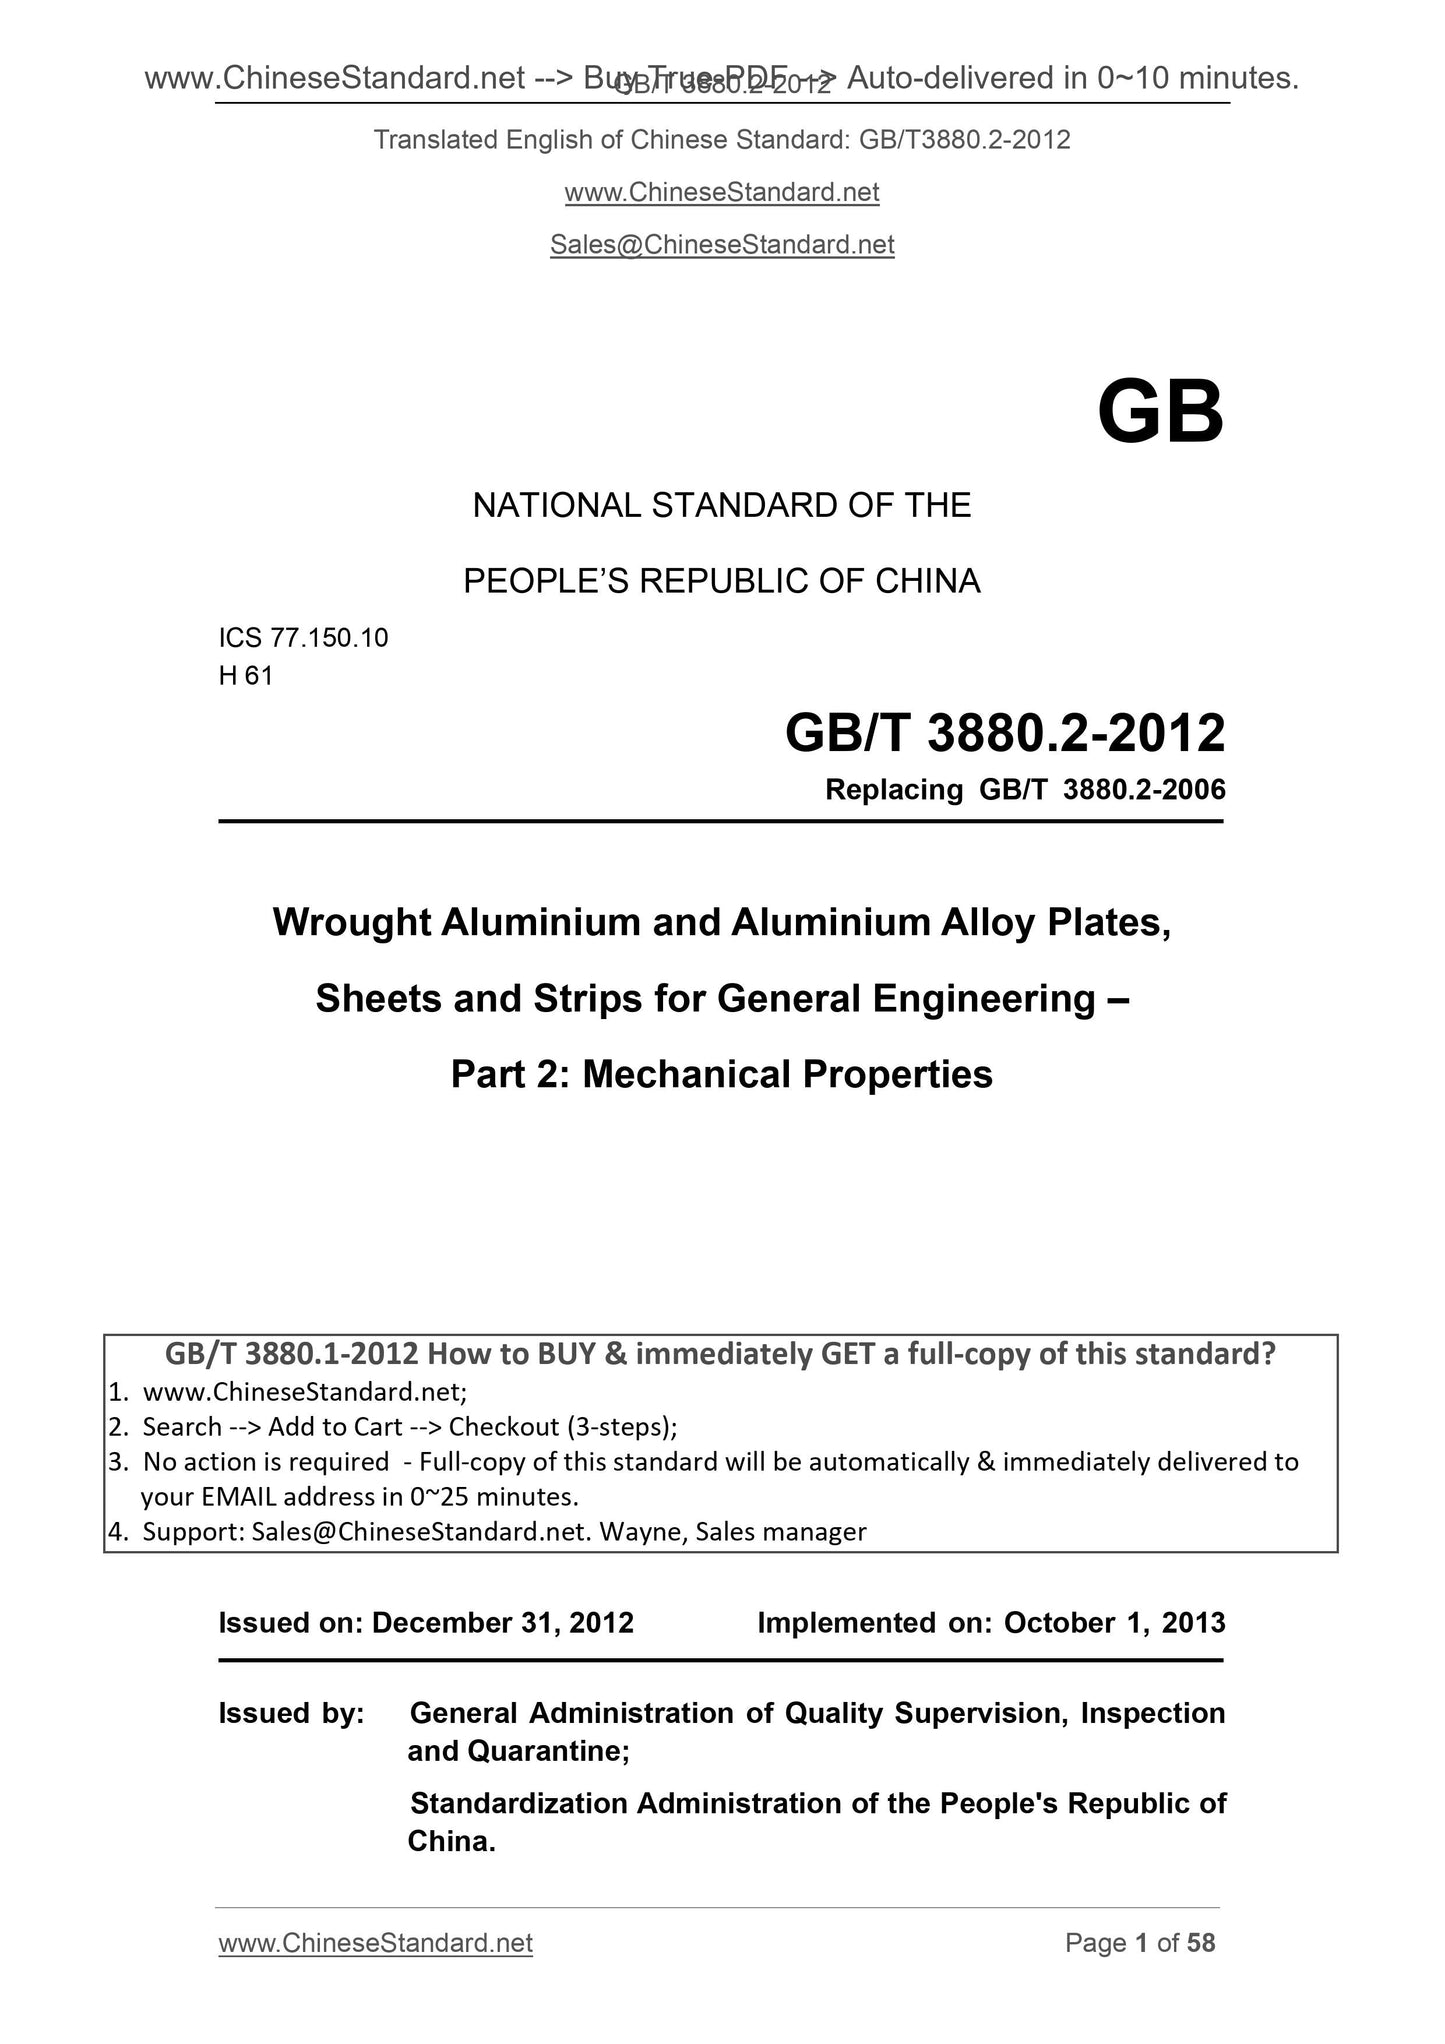 GB/T 3880.2-2012 Page 1